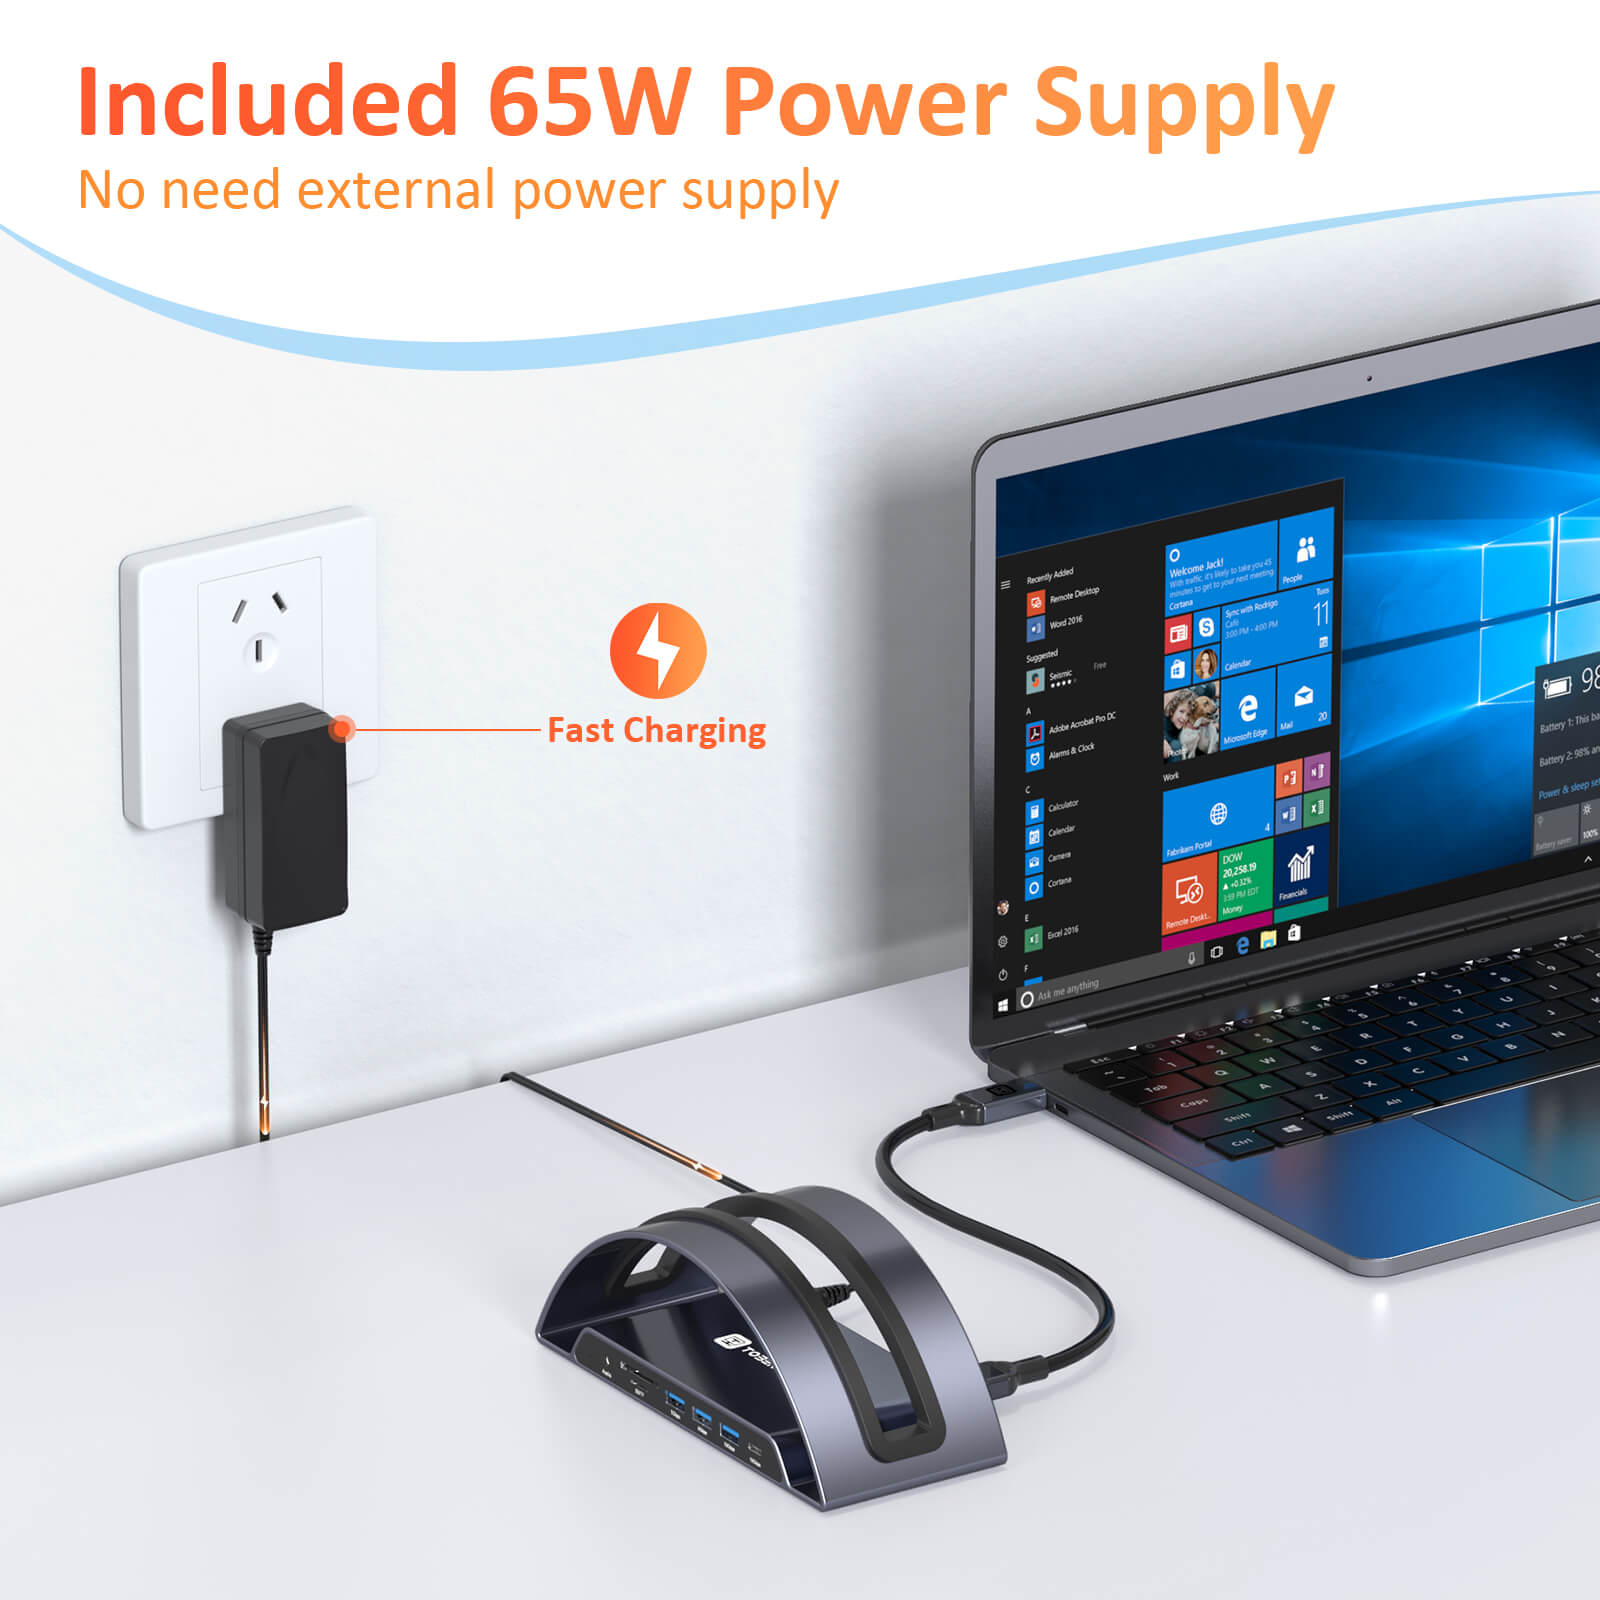 UDS022 USB C Dock Stand with 65W Power Supply